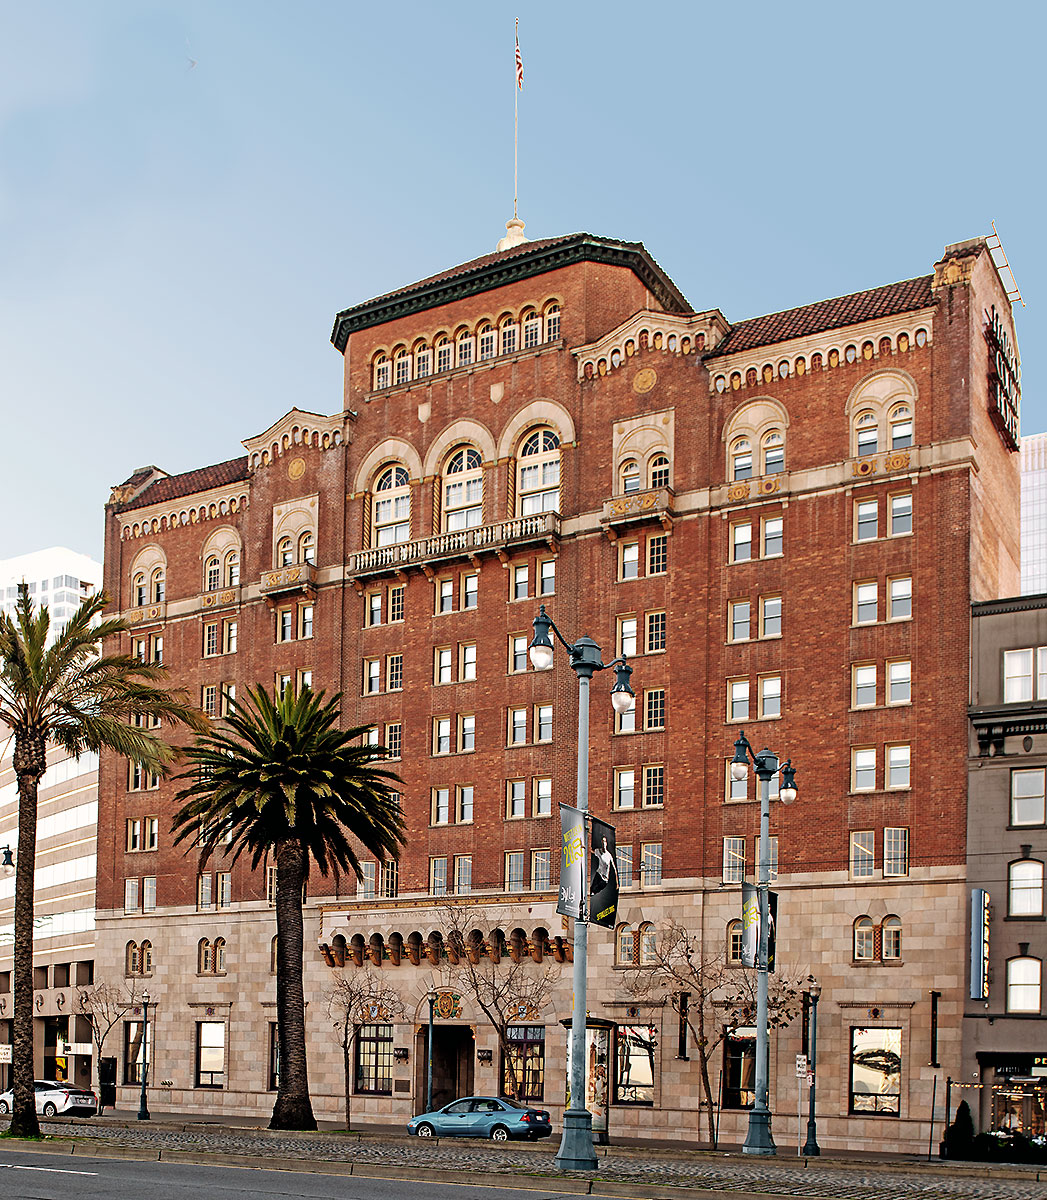 The Embarcadero Y.M.C.A. was designed by Frederick H. Meyer and built in 1924.